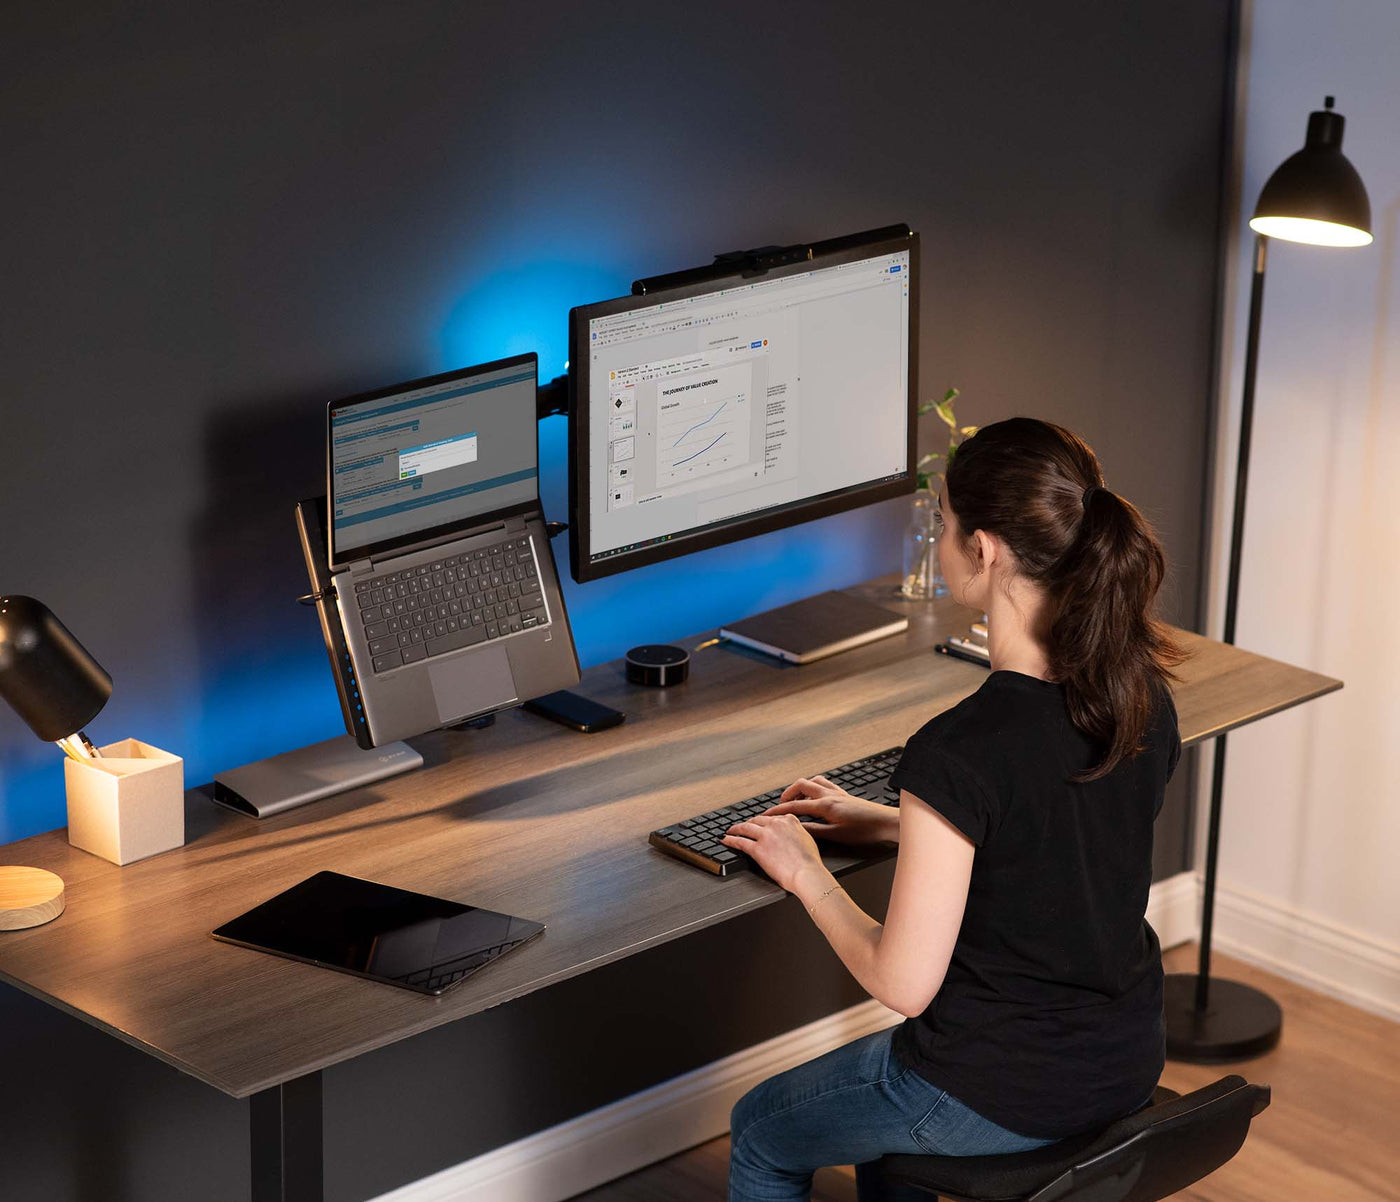 Fully adjustable single computer monitor and laptop desk mount allows you to display your laptop beside your monitor screen for ergonomic placement.